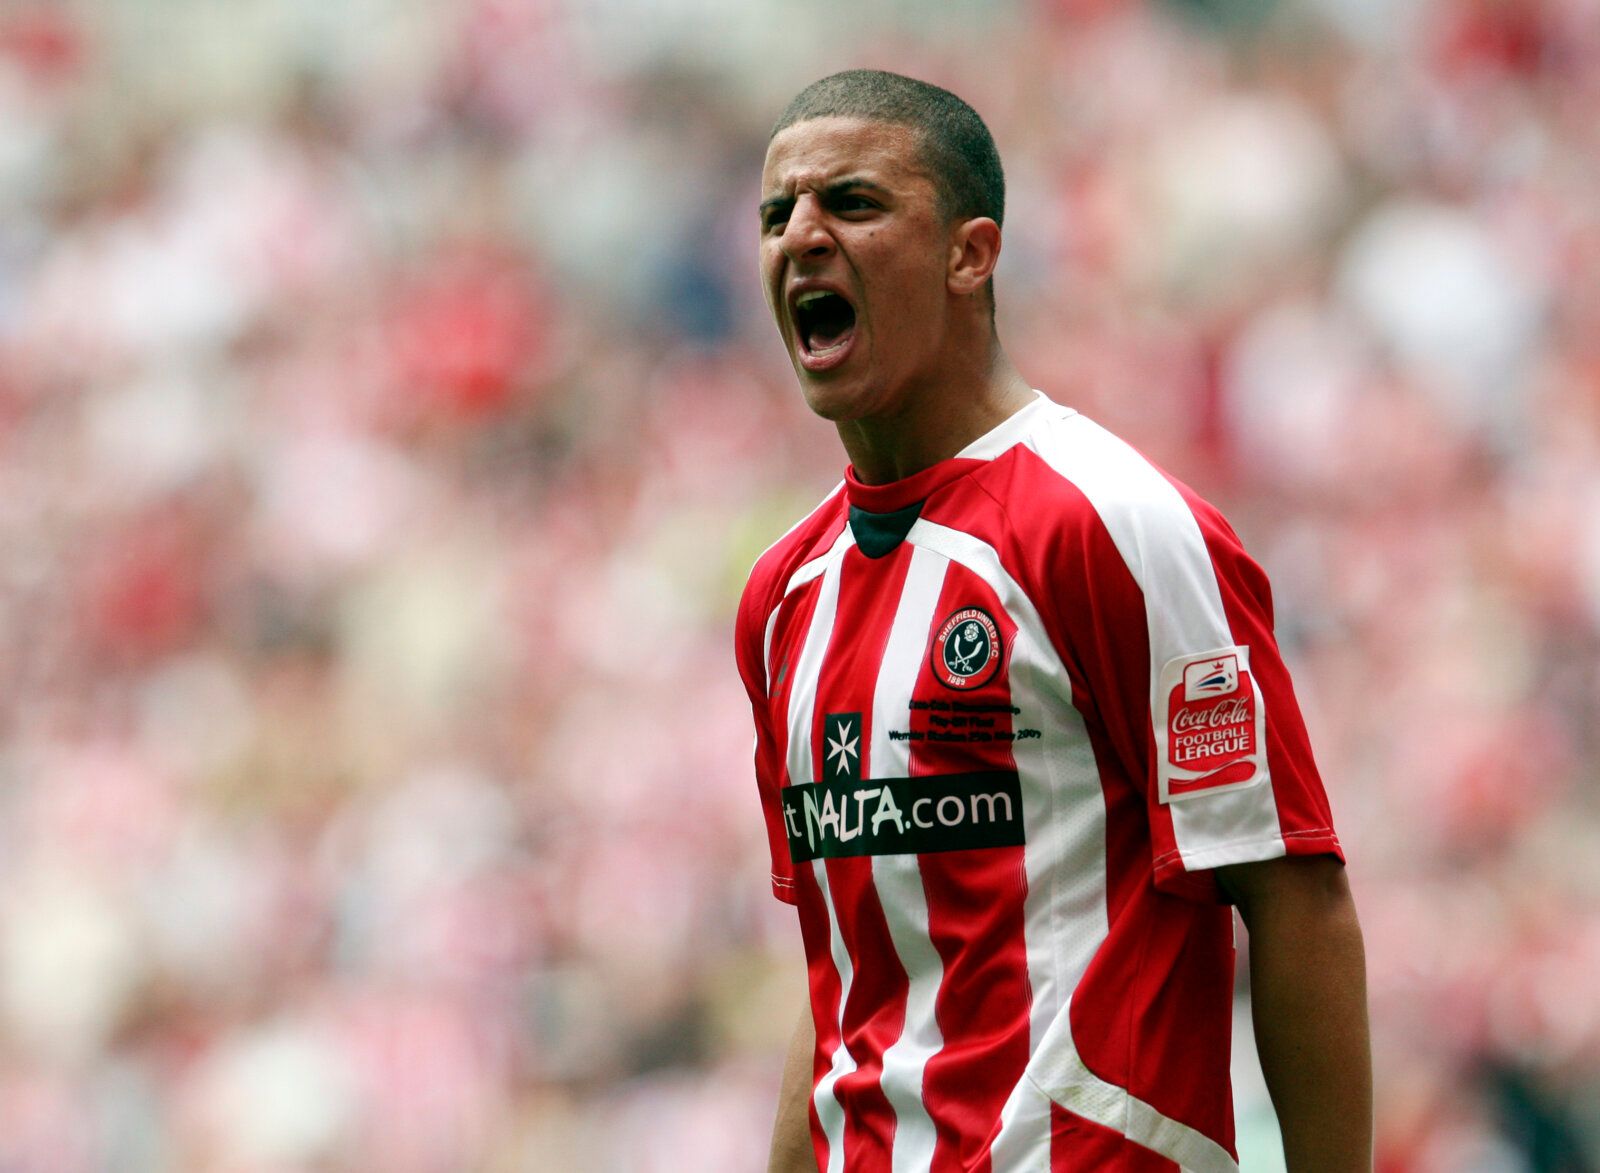 Football - Burnley v Sheffield United - Coca-Cola Football League Championship Play Off Final - Wembley Stadium - 08/09 - 25/5/09 
Sheffield United's Kyle Walker looks dejected 
Mandatory Credit: Action Images / Andrew Couldridge